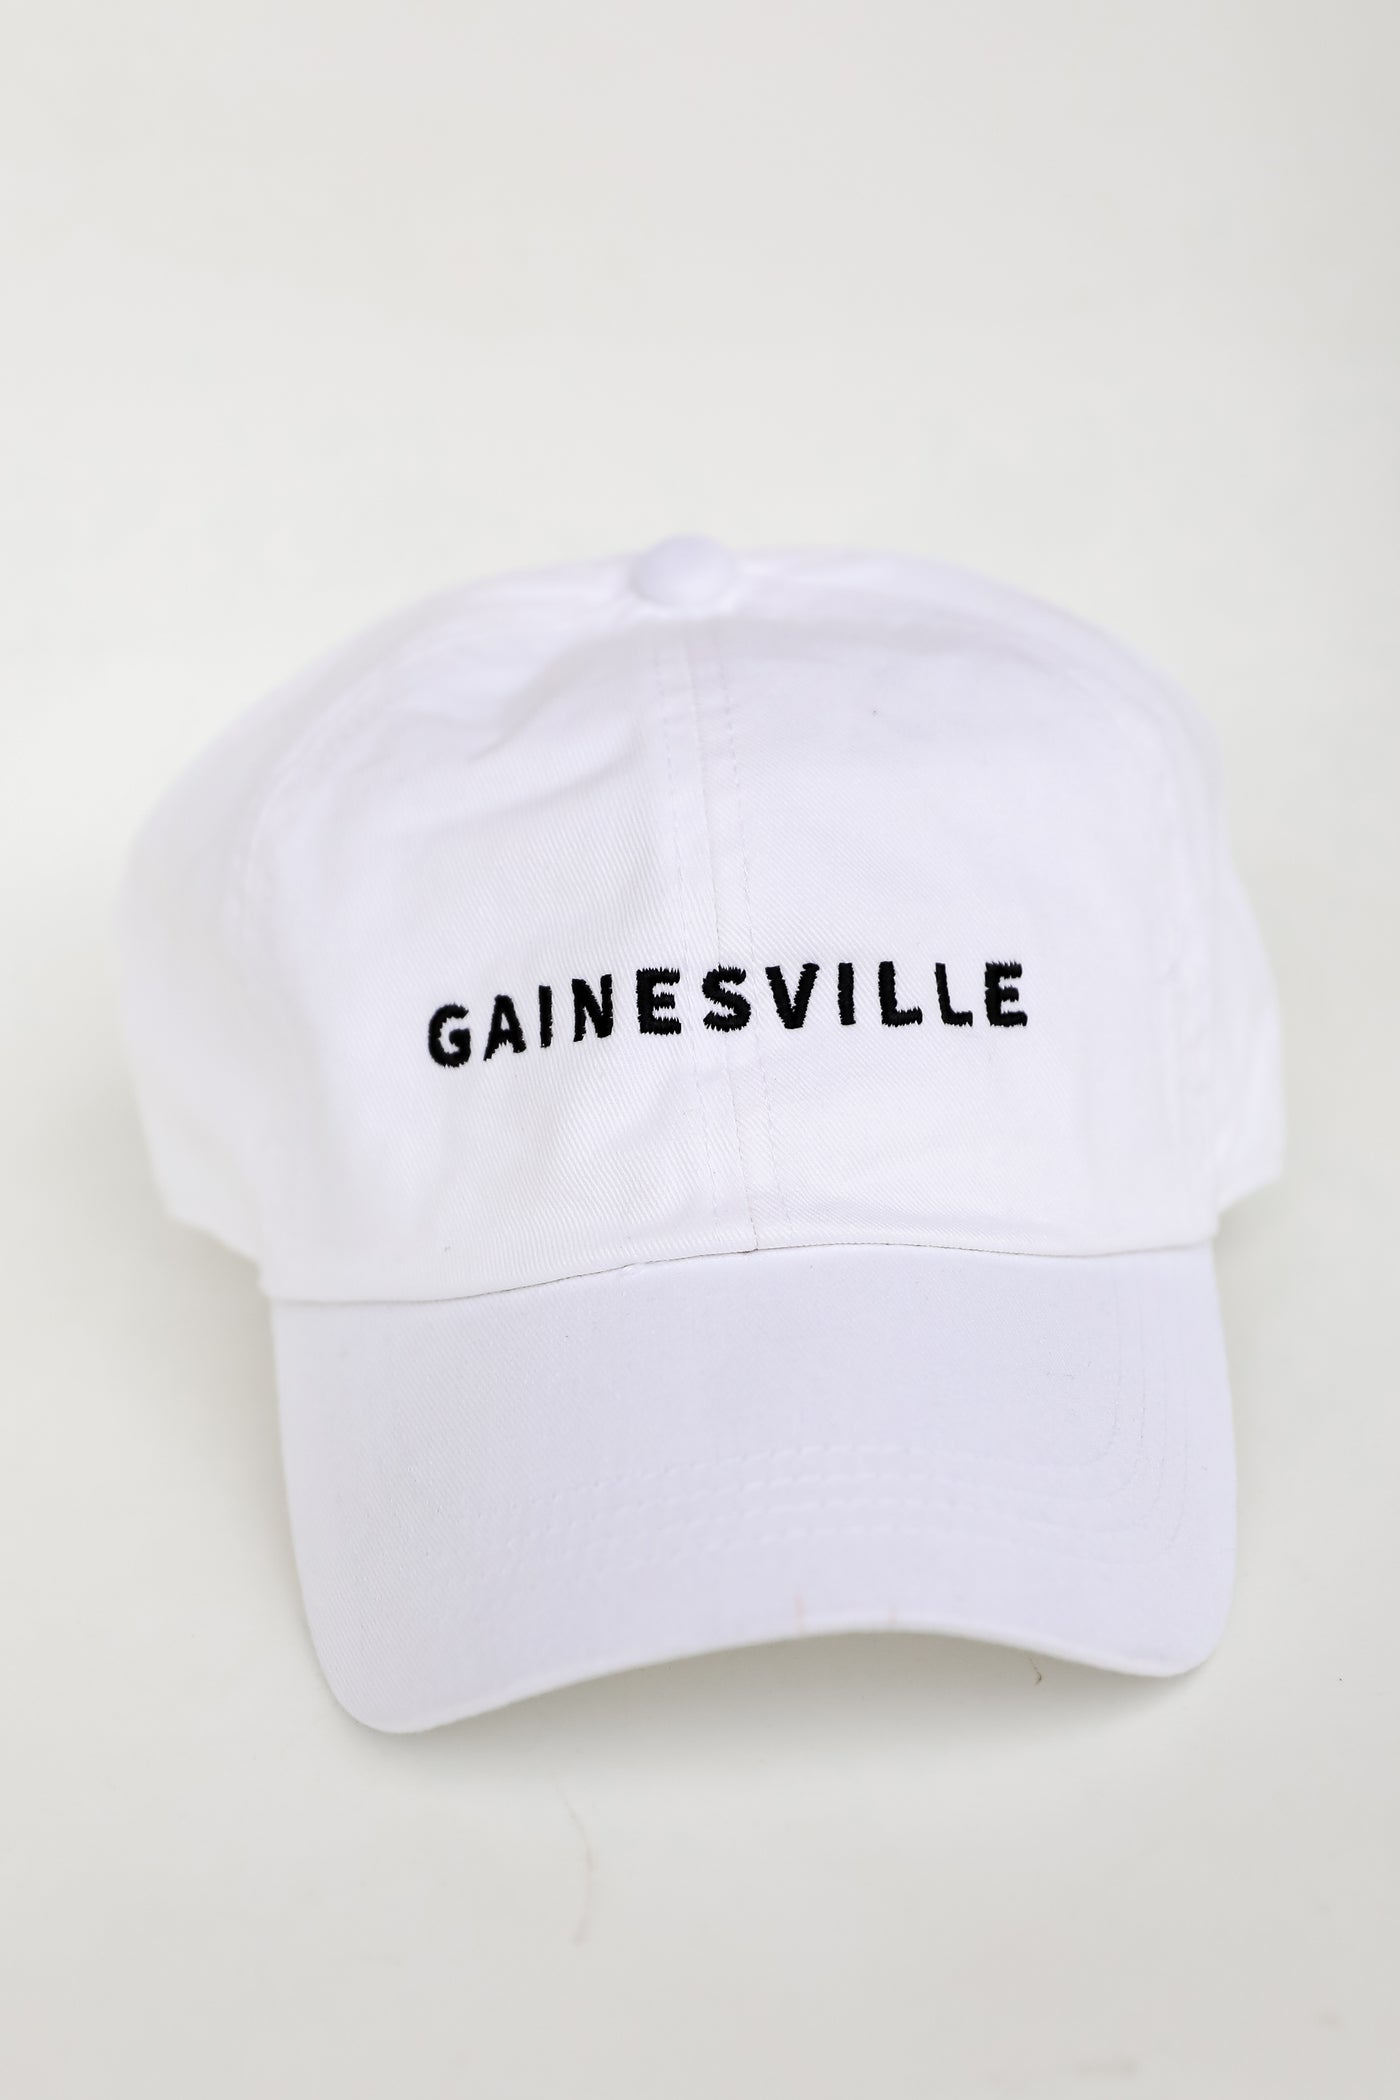 Gainesville Embroidered Hat